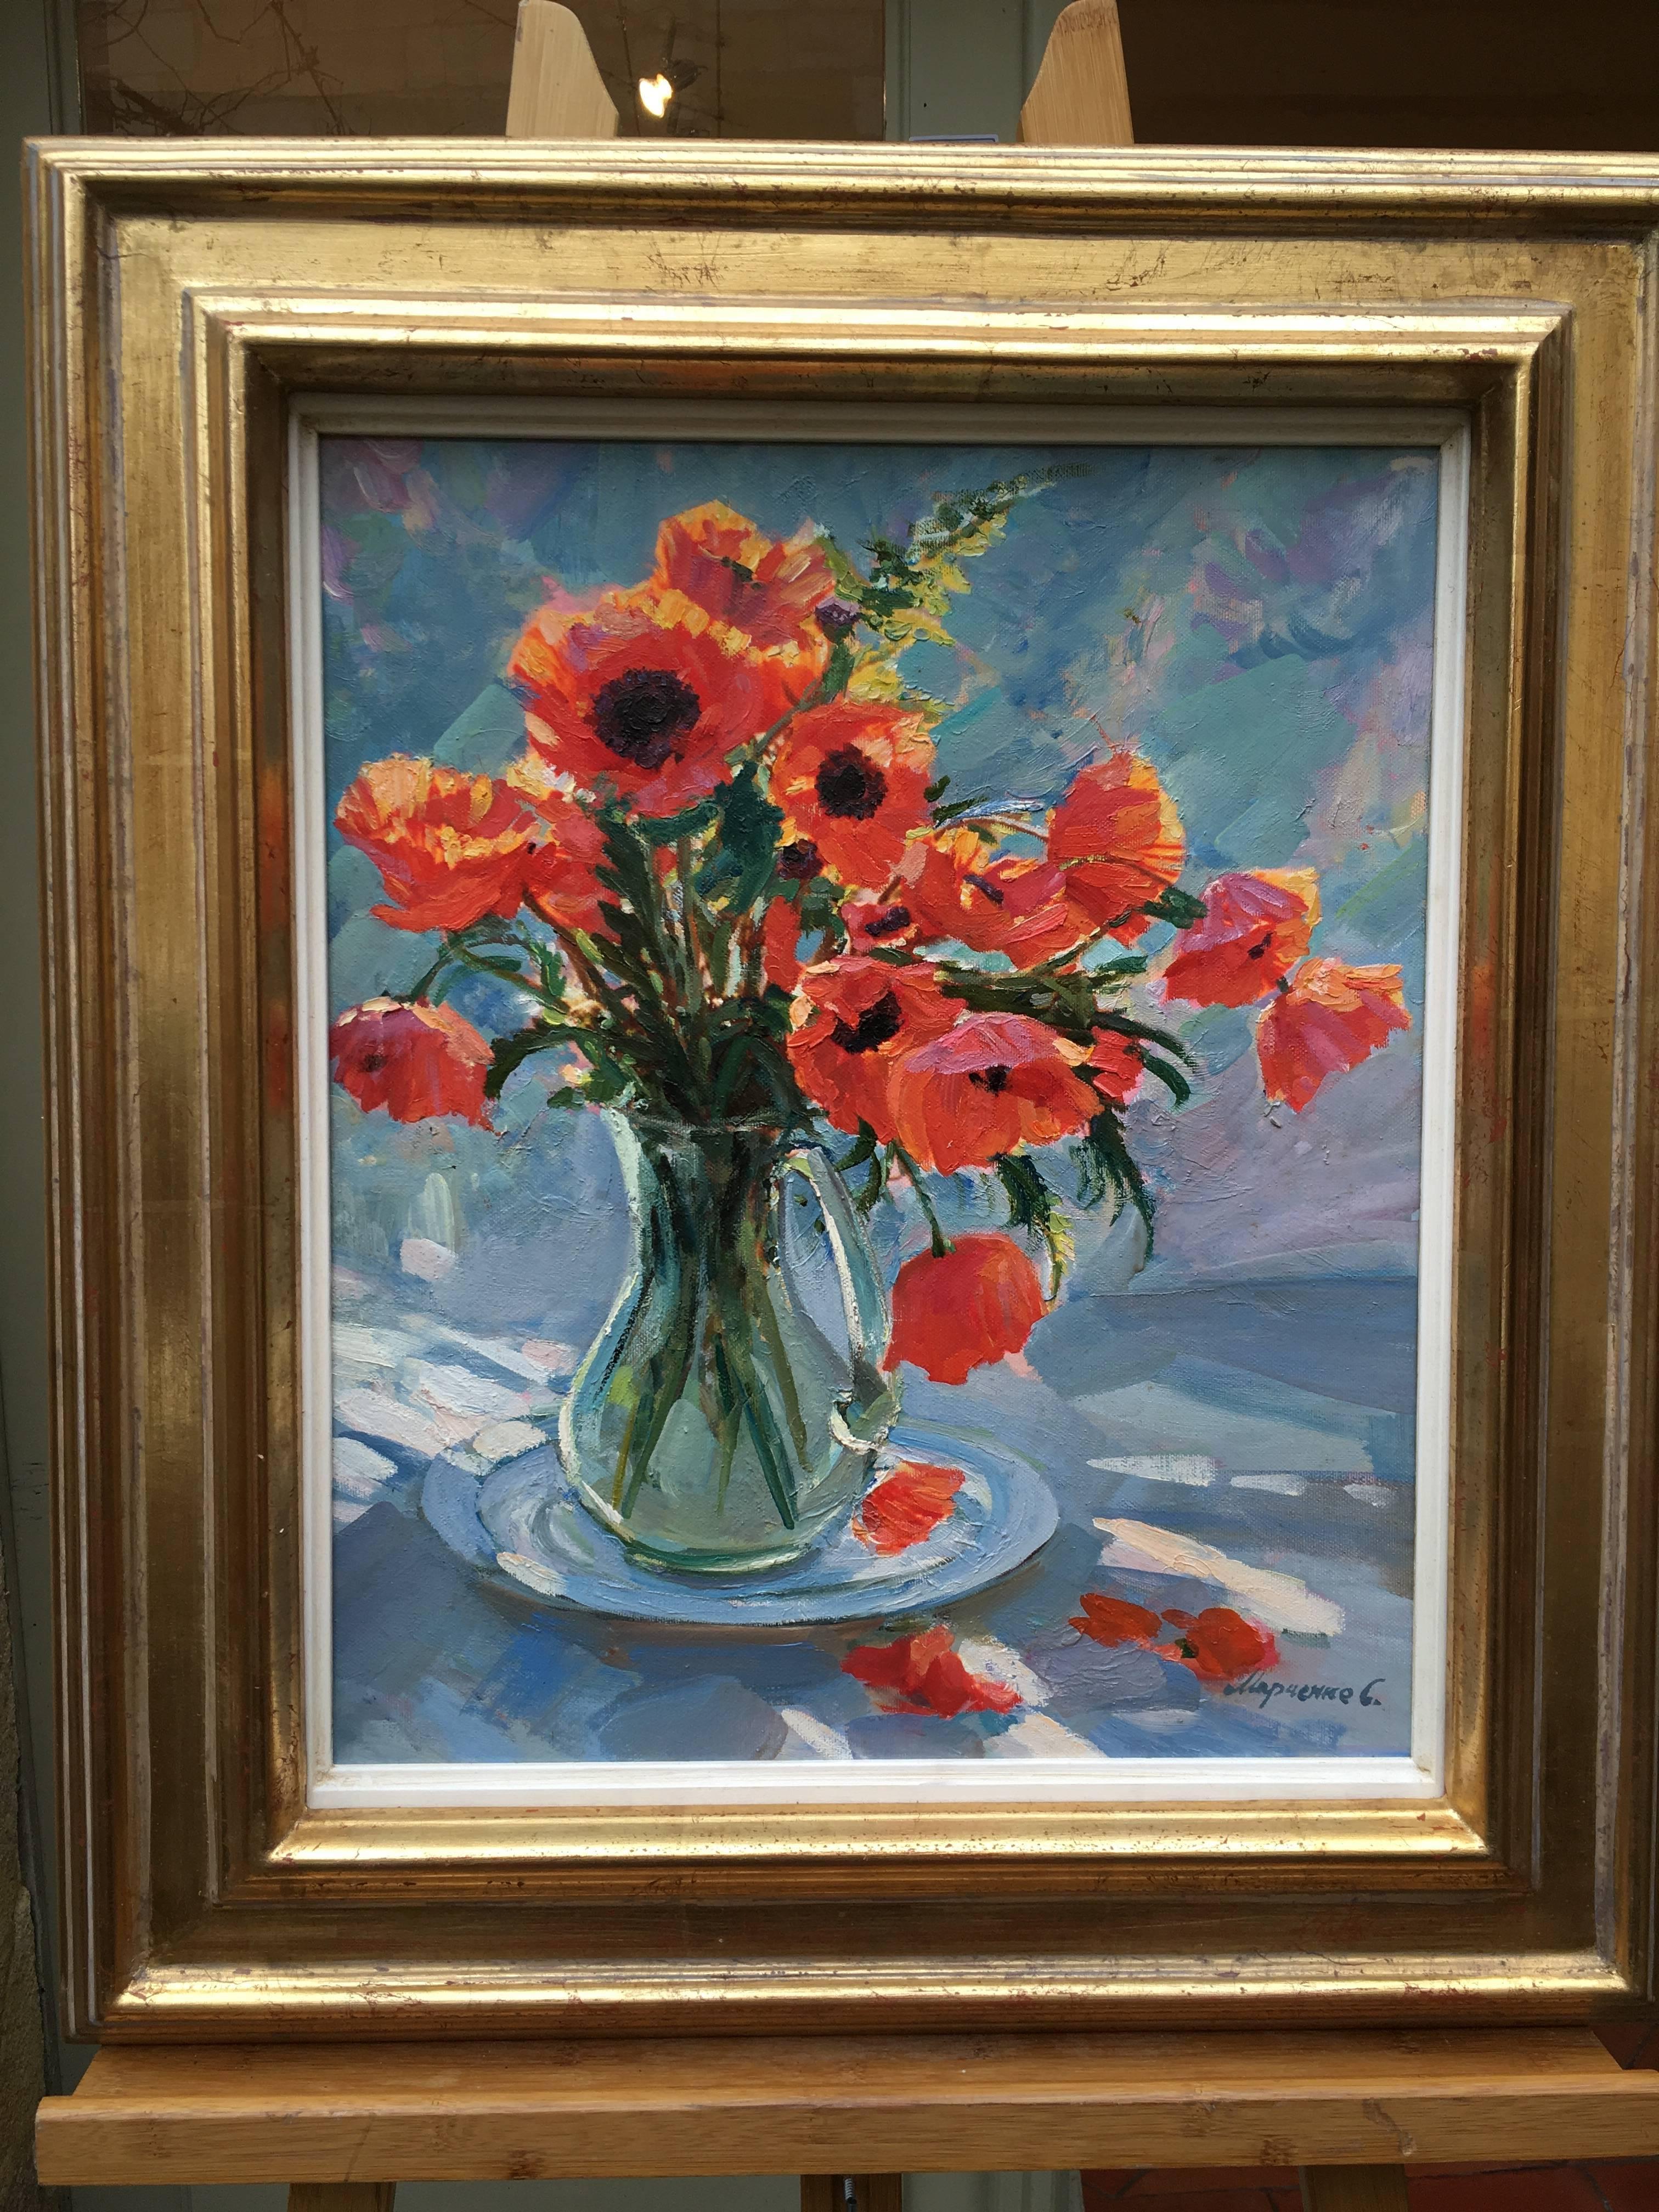 The Poppies. Marchenko Impresionist vase with flowers. Oil con canvas still-life - Brown Figurative Painting by Sergey Marchenko